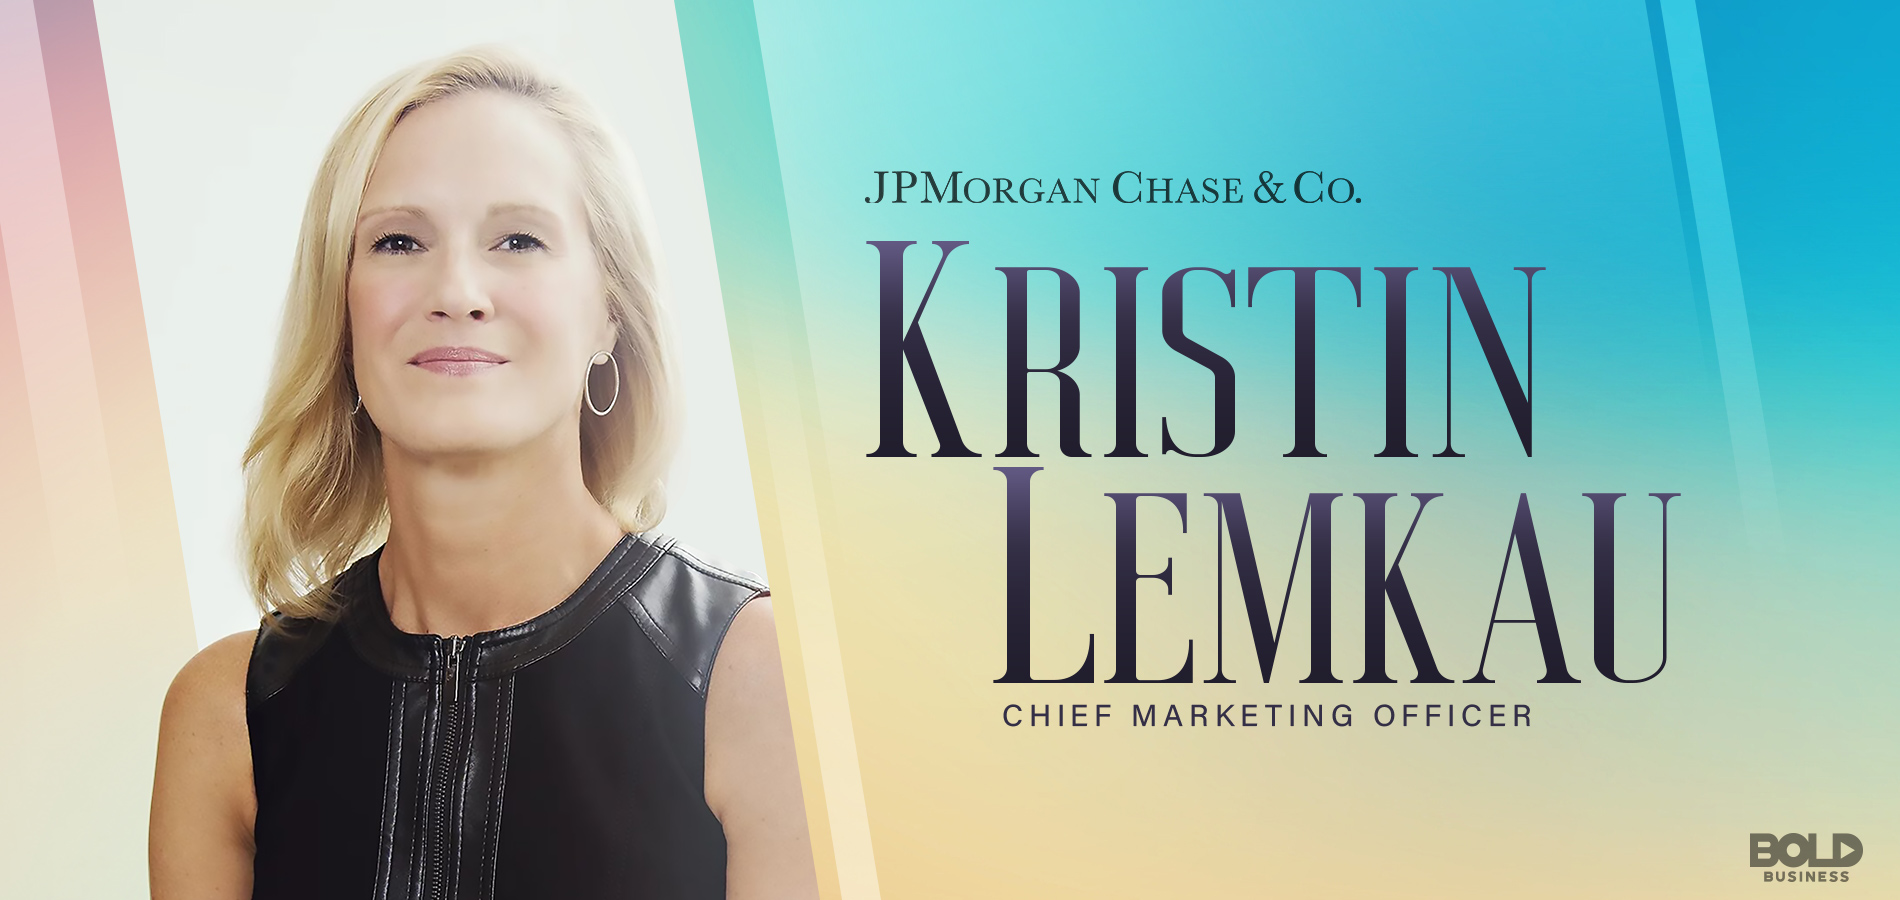 Chief Marketing Officer Kristin Lemkau has taken risks that have paid off for JPMorgan Chase.